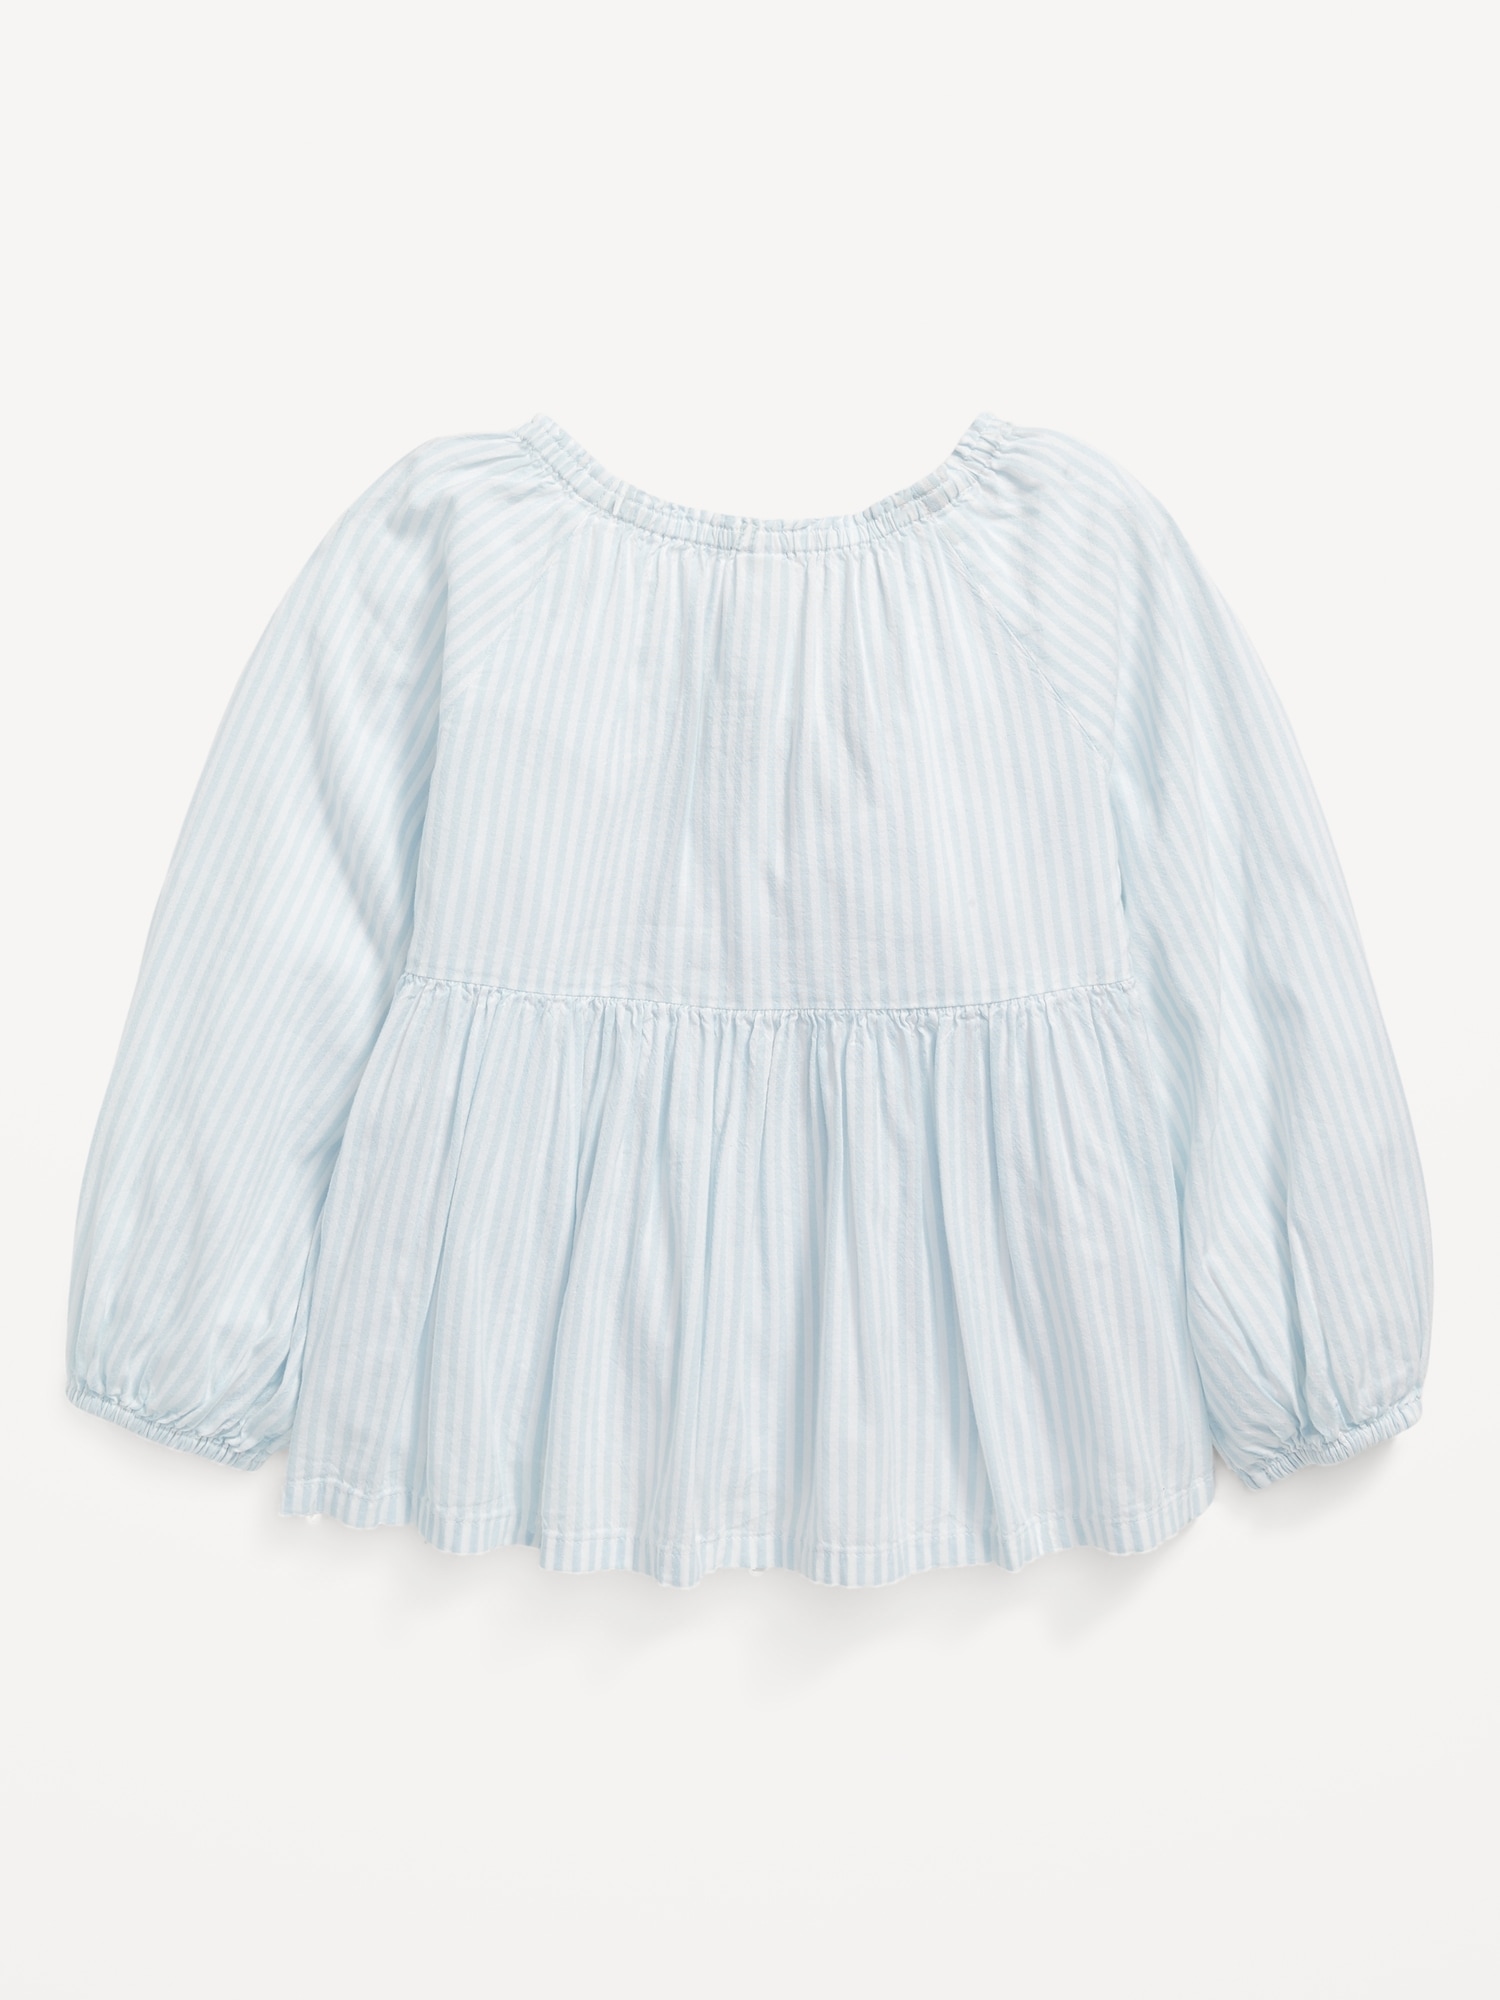 Long-Sleeve Striped Swing Top for Girls | Old Navy